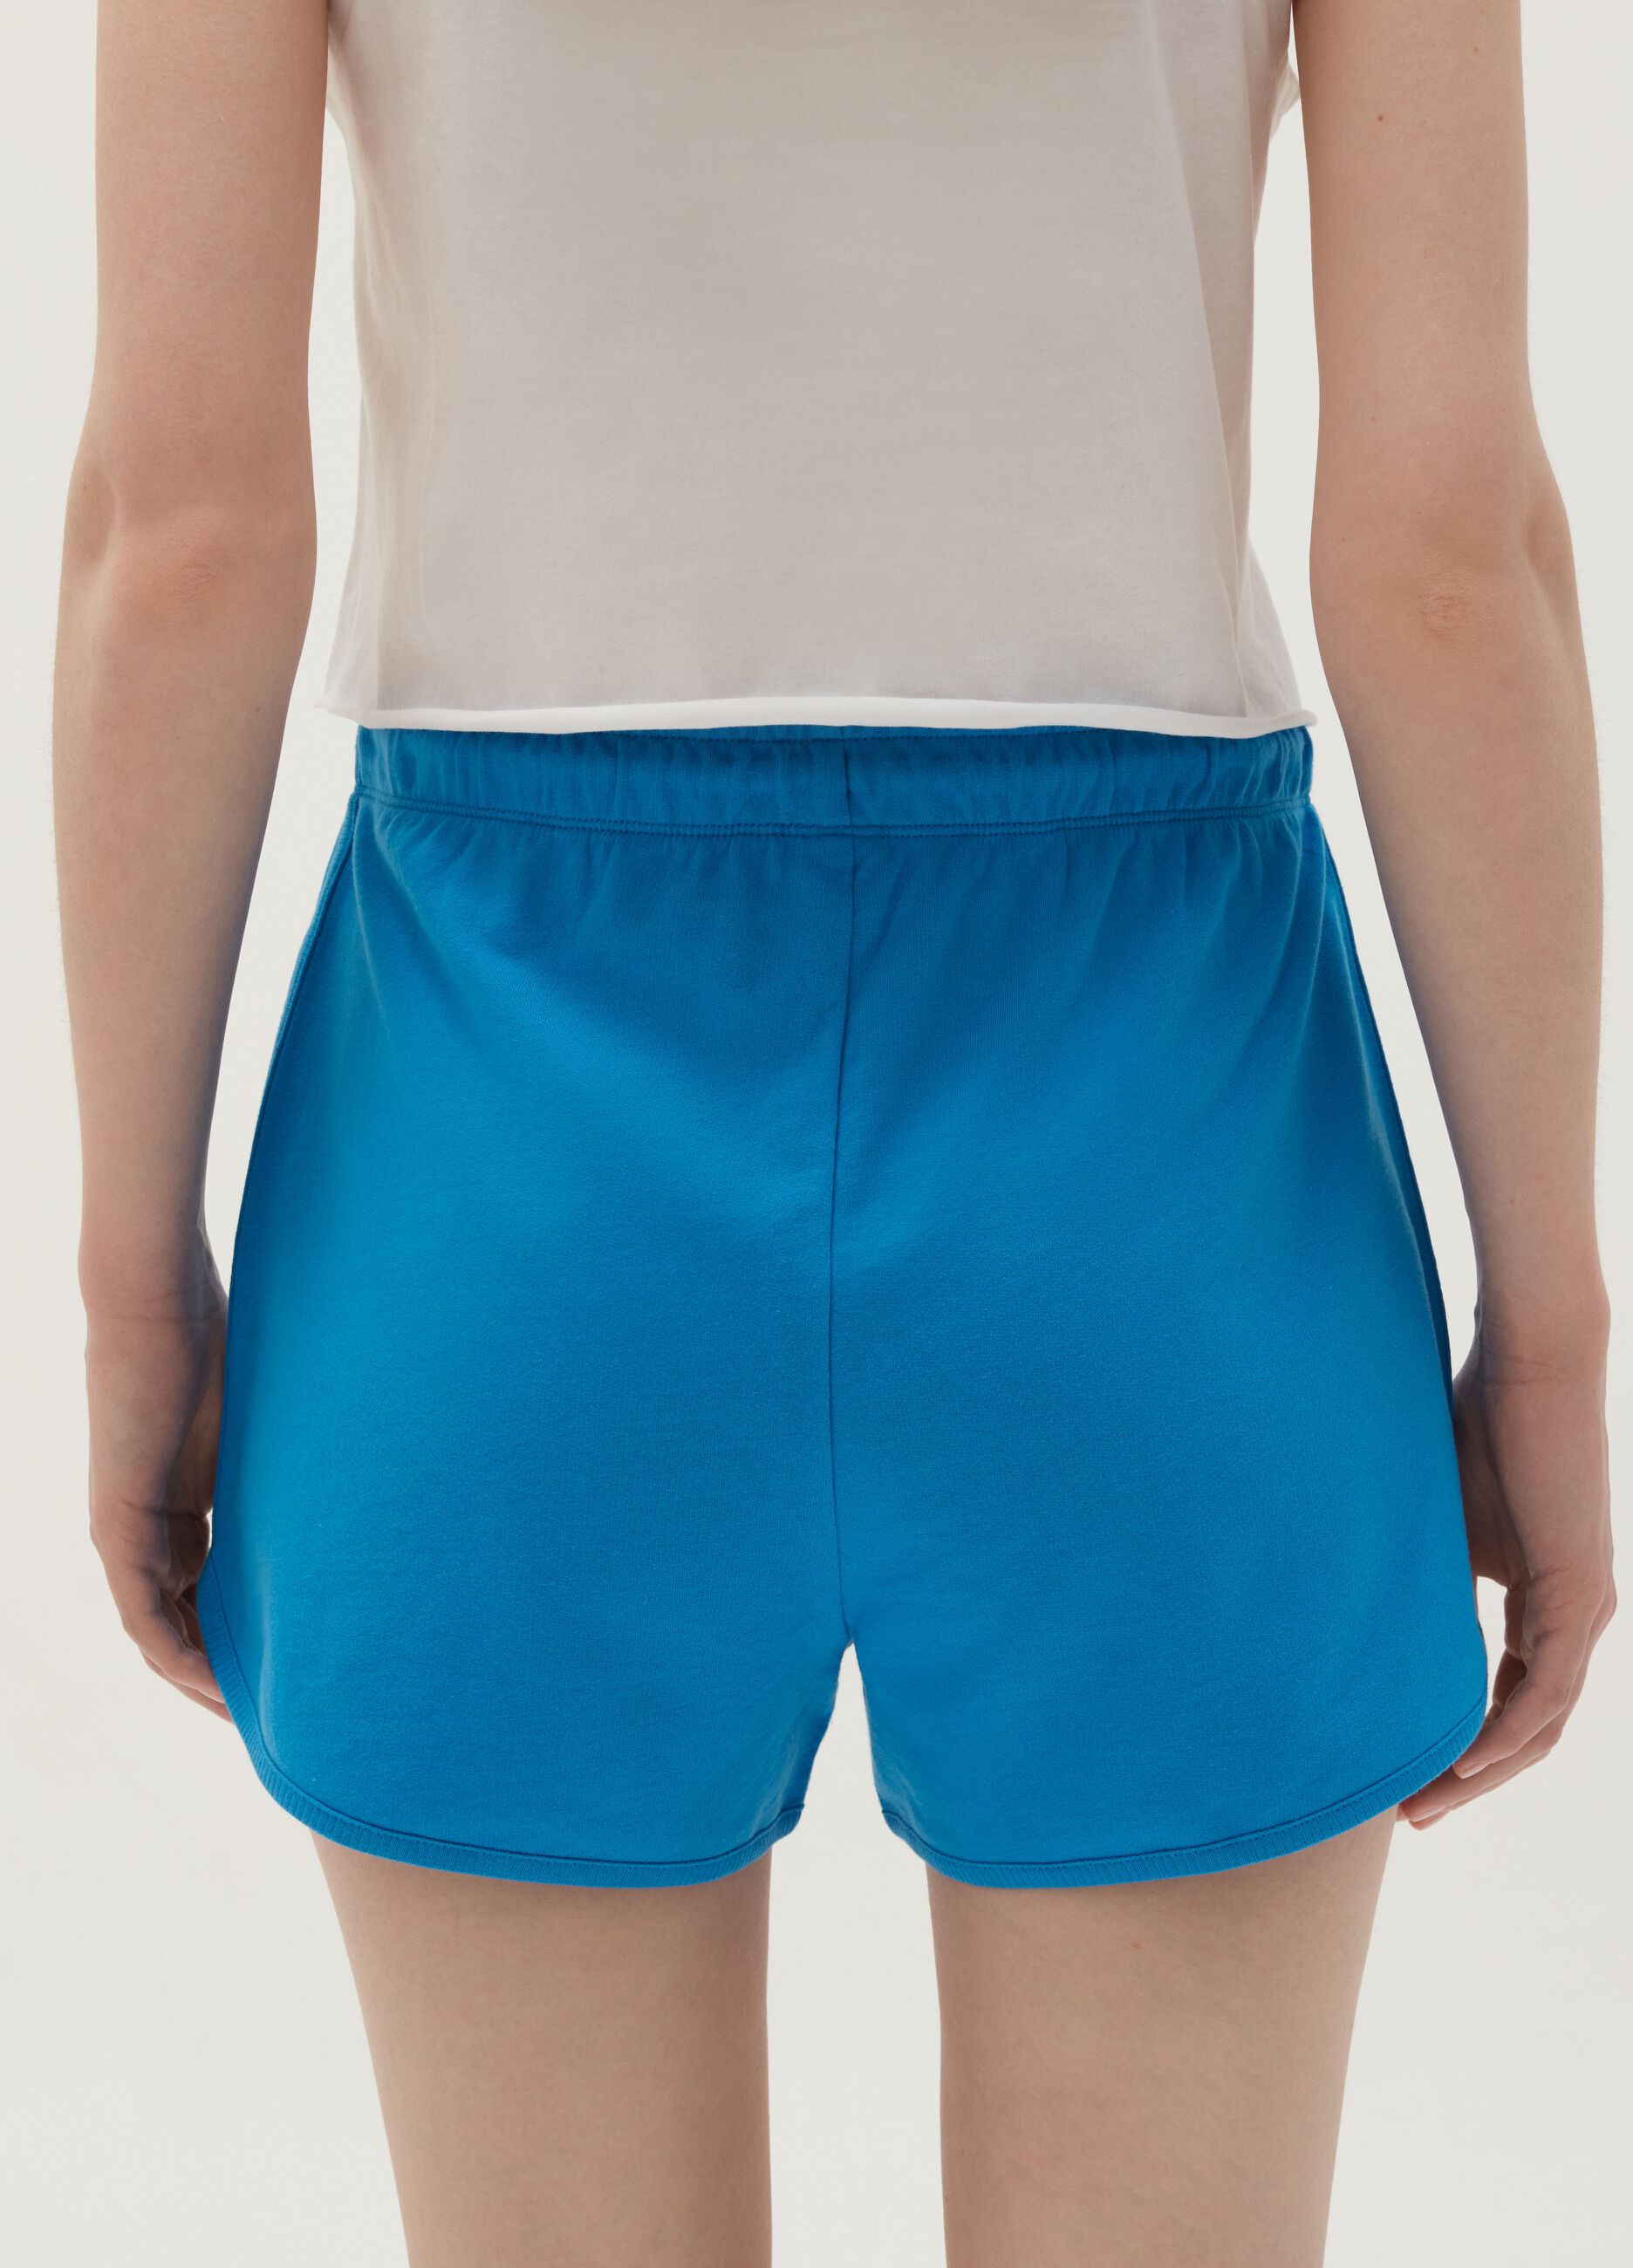 Maui and Sons fleece shorts with print